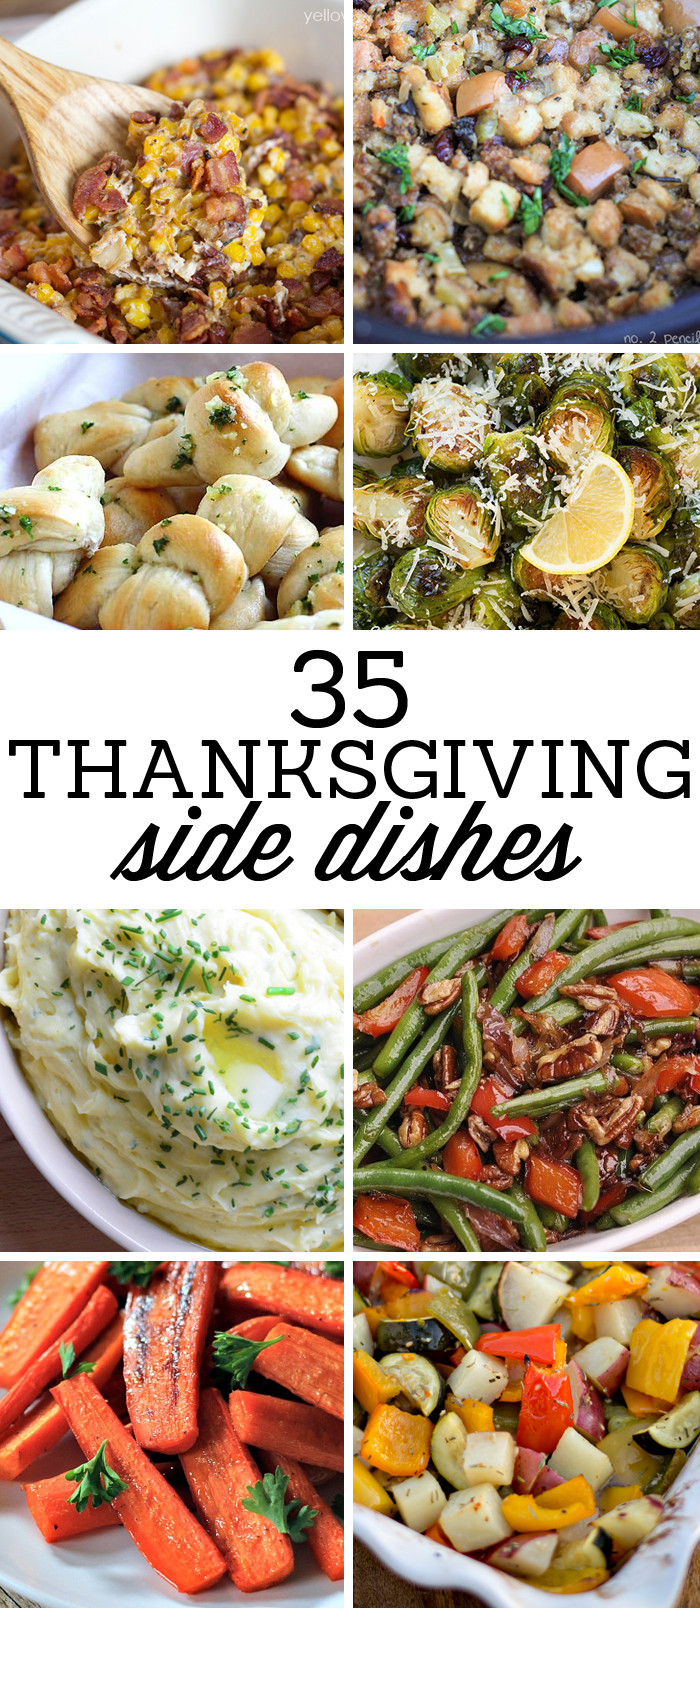 Top Thanksgiving Side Dishes
 35 Side Dishes for Christmas Dinner Yellow Bliss Road